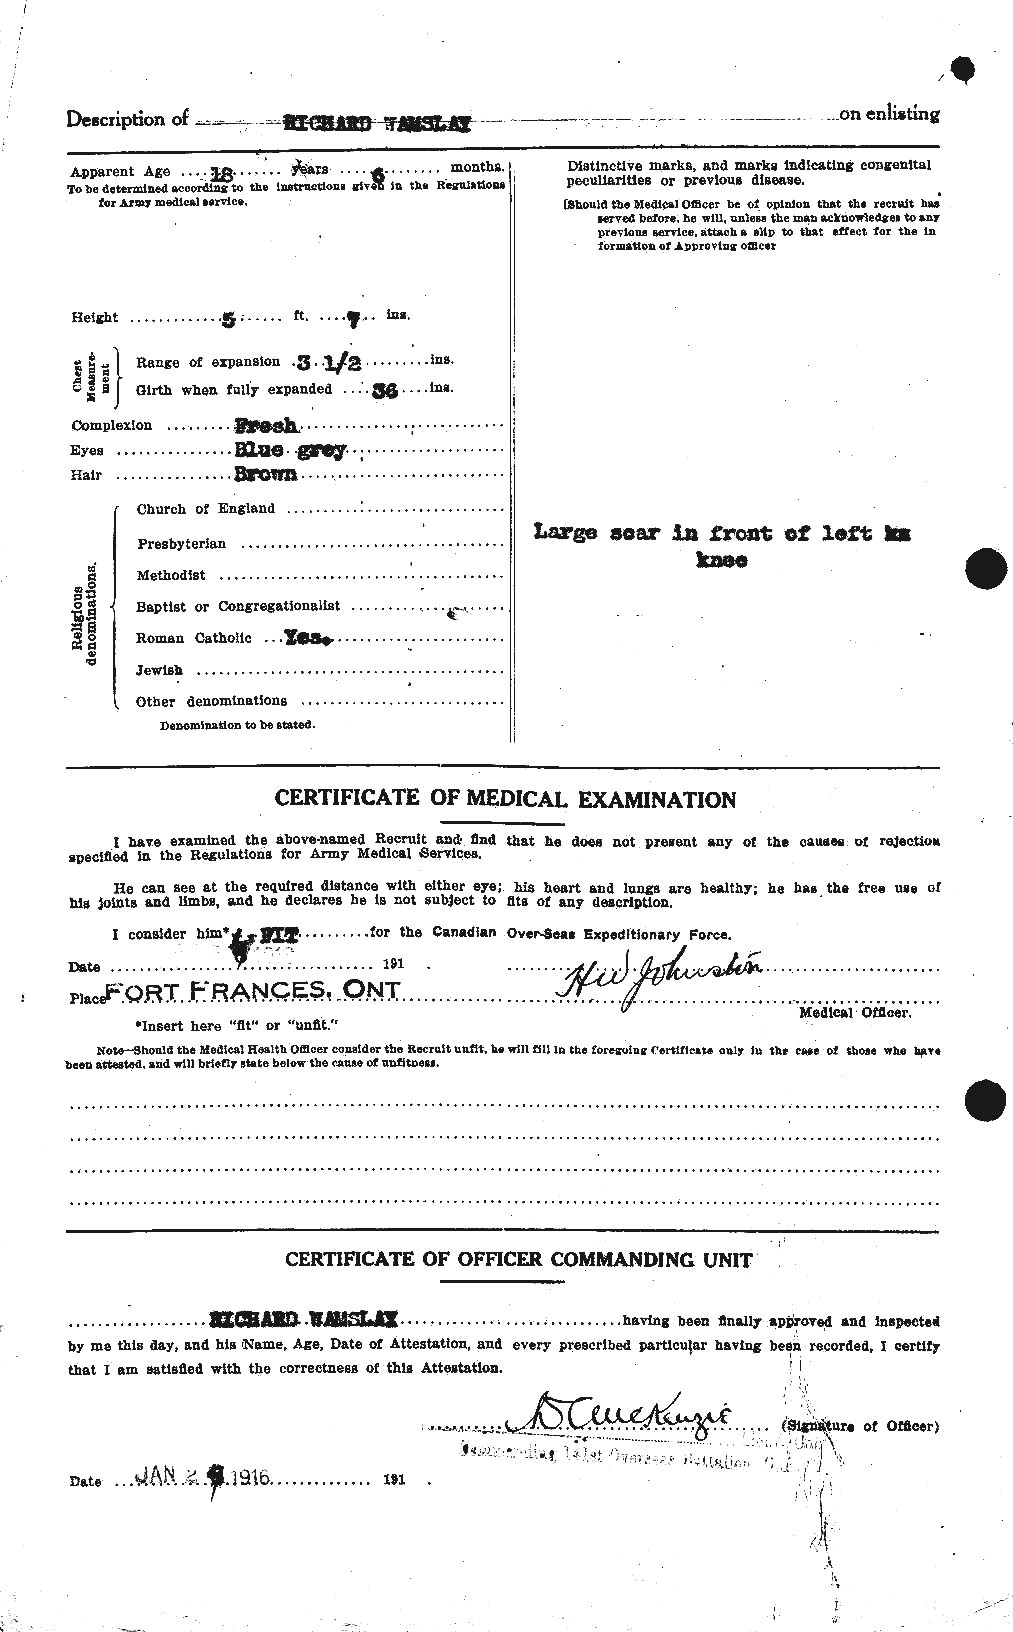 Personnel Records of the First World War - CEF 654893b